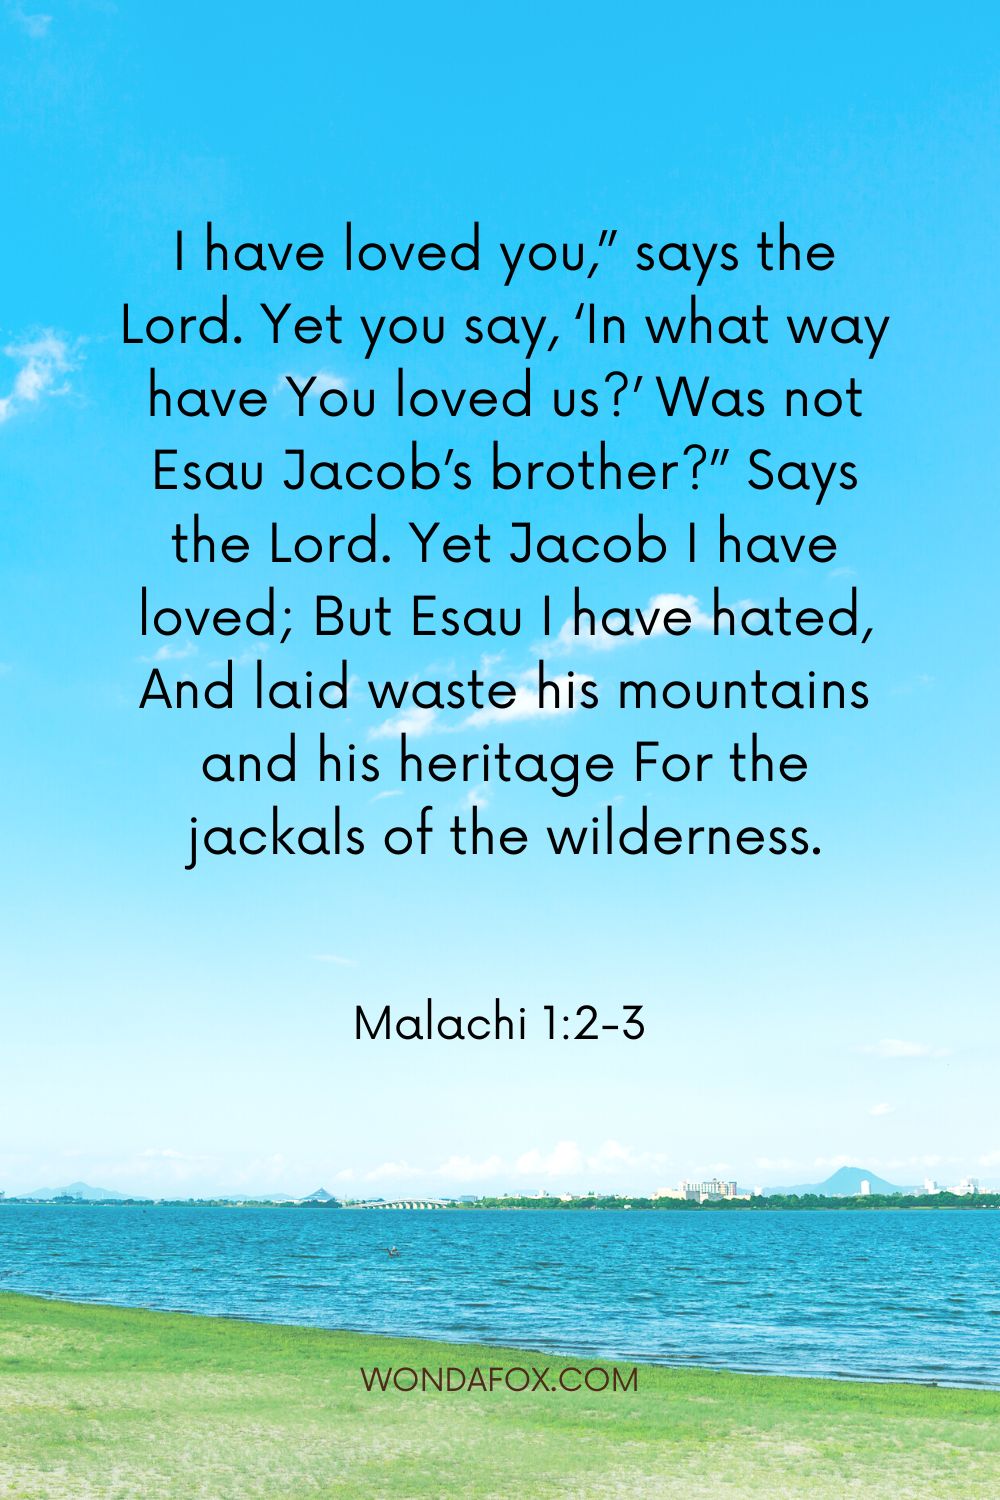 I have loved you,” says the Lord. Yet you say, ‘In what way have You loved us?’ Was not Esau Jacob’s brother?” Says the Lord. Yet Jacob I have loved; But Esau I have hated, And laid waste his mountains and his heritage For the jackals of the wilderness.